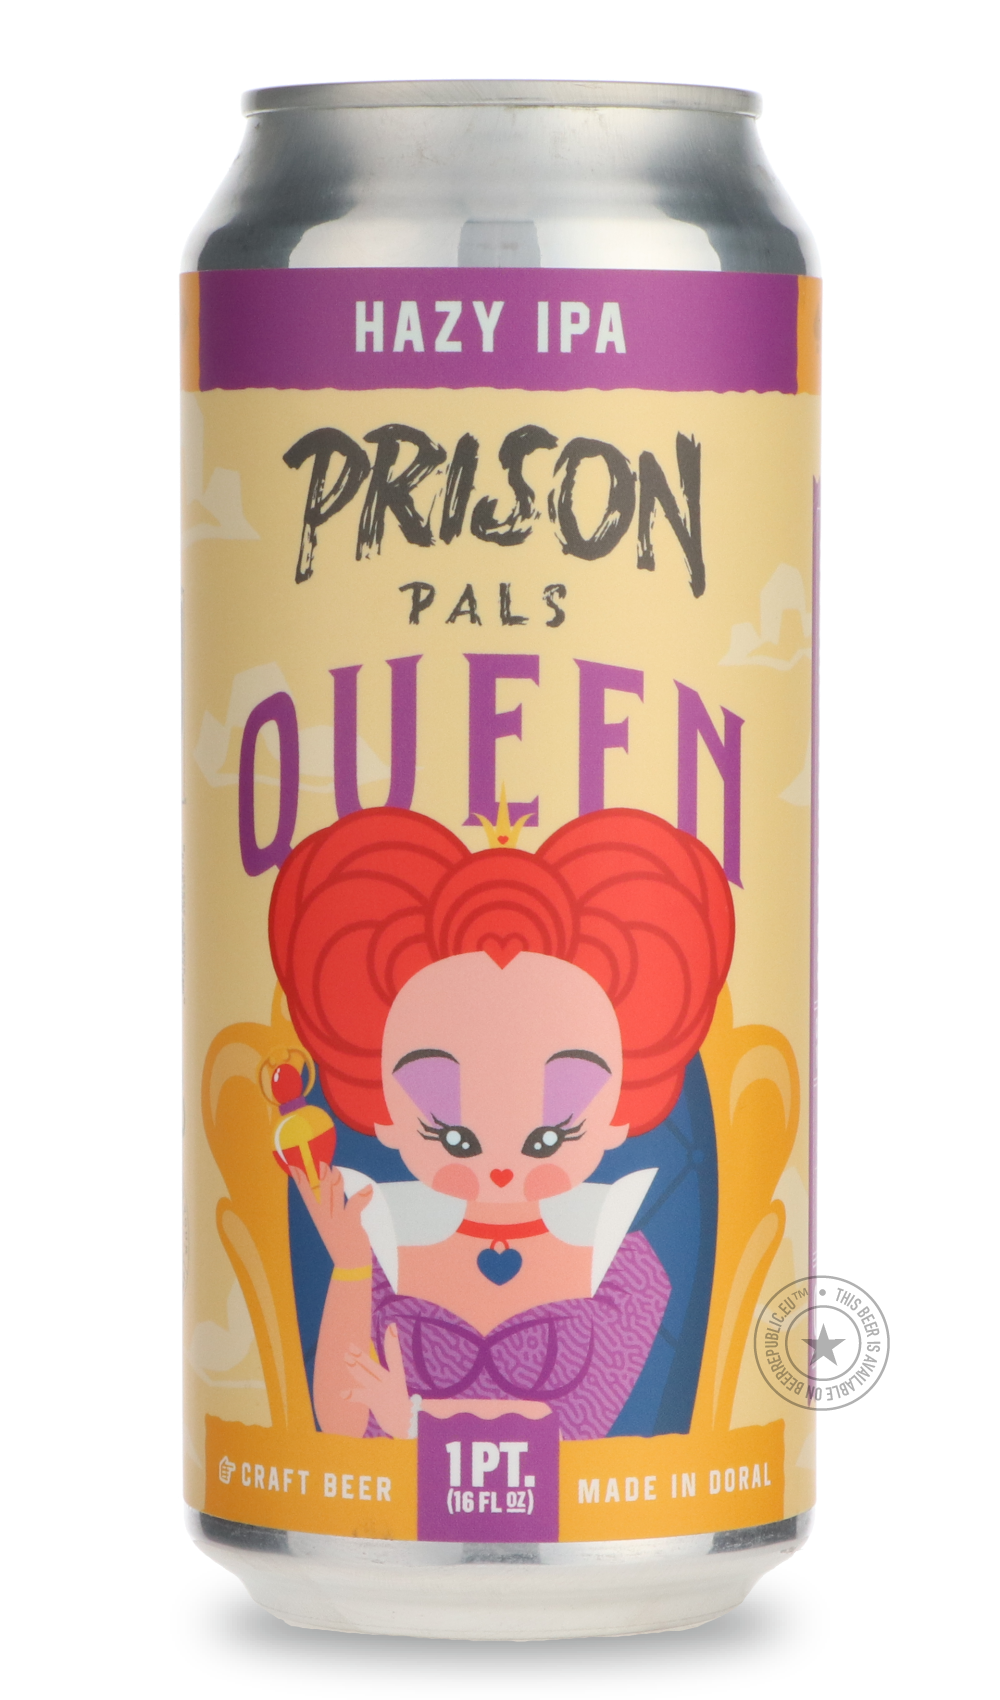 -Prison Pals- Queen-IPA- Only @ Beer Republic - The best online beer store for American & Canadian craft beer - Buy beer online from the USA and Canada - Bier online kopen - Amerikaans bier kopen - Craft beer store - Craft beer kopen - Amerikanisch bier kaufen - Bier online kaufen - Acheter biere online - IPA - Stout - Porter - New England IPA - Hazy IPA - Imperial Stout - Barrel Aged - Barrel Aged Imperial Stout - Brown - Dark beer - Blond - Blonde - Pilsner - Lager - Wheat - Weizen - Amber - Barley Wine -